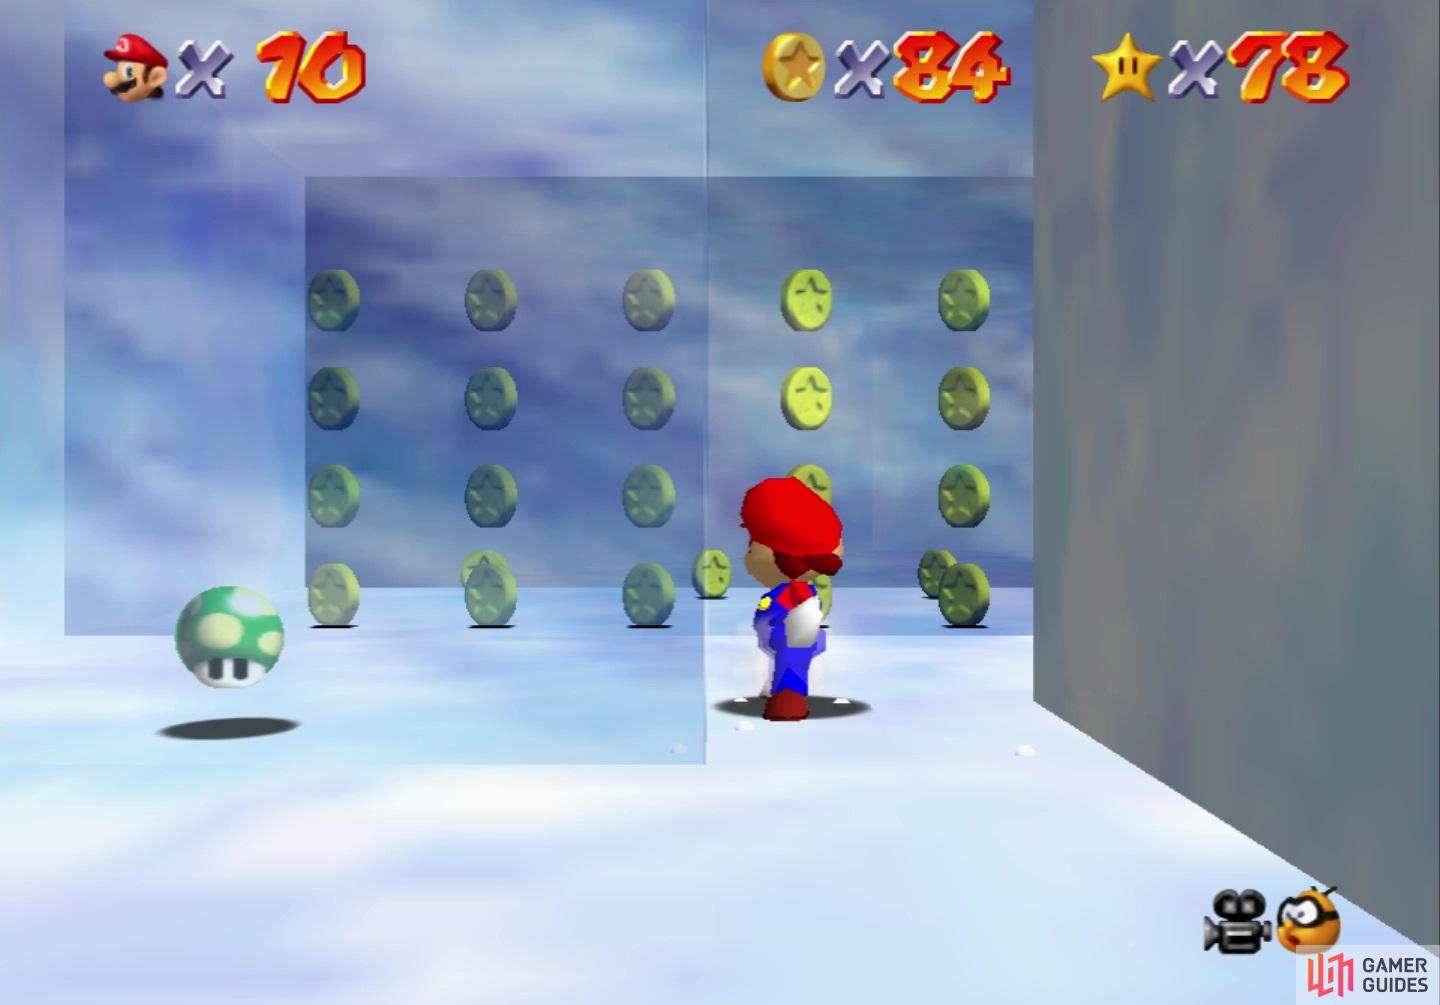 There’s a lot of coins in the one ice wall inside the igloo